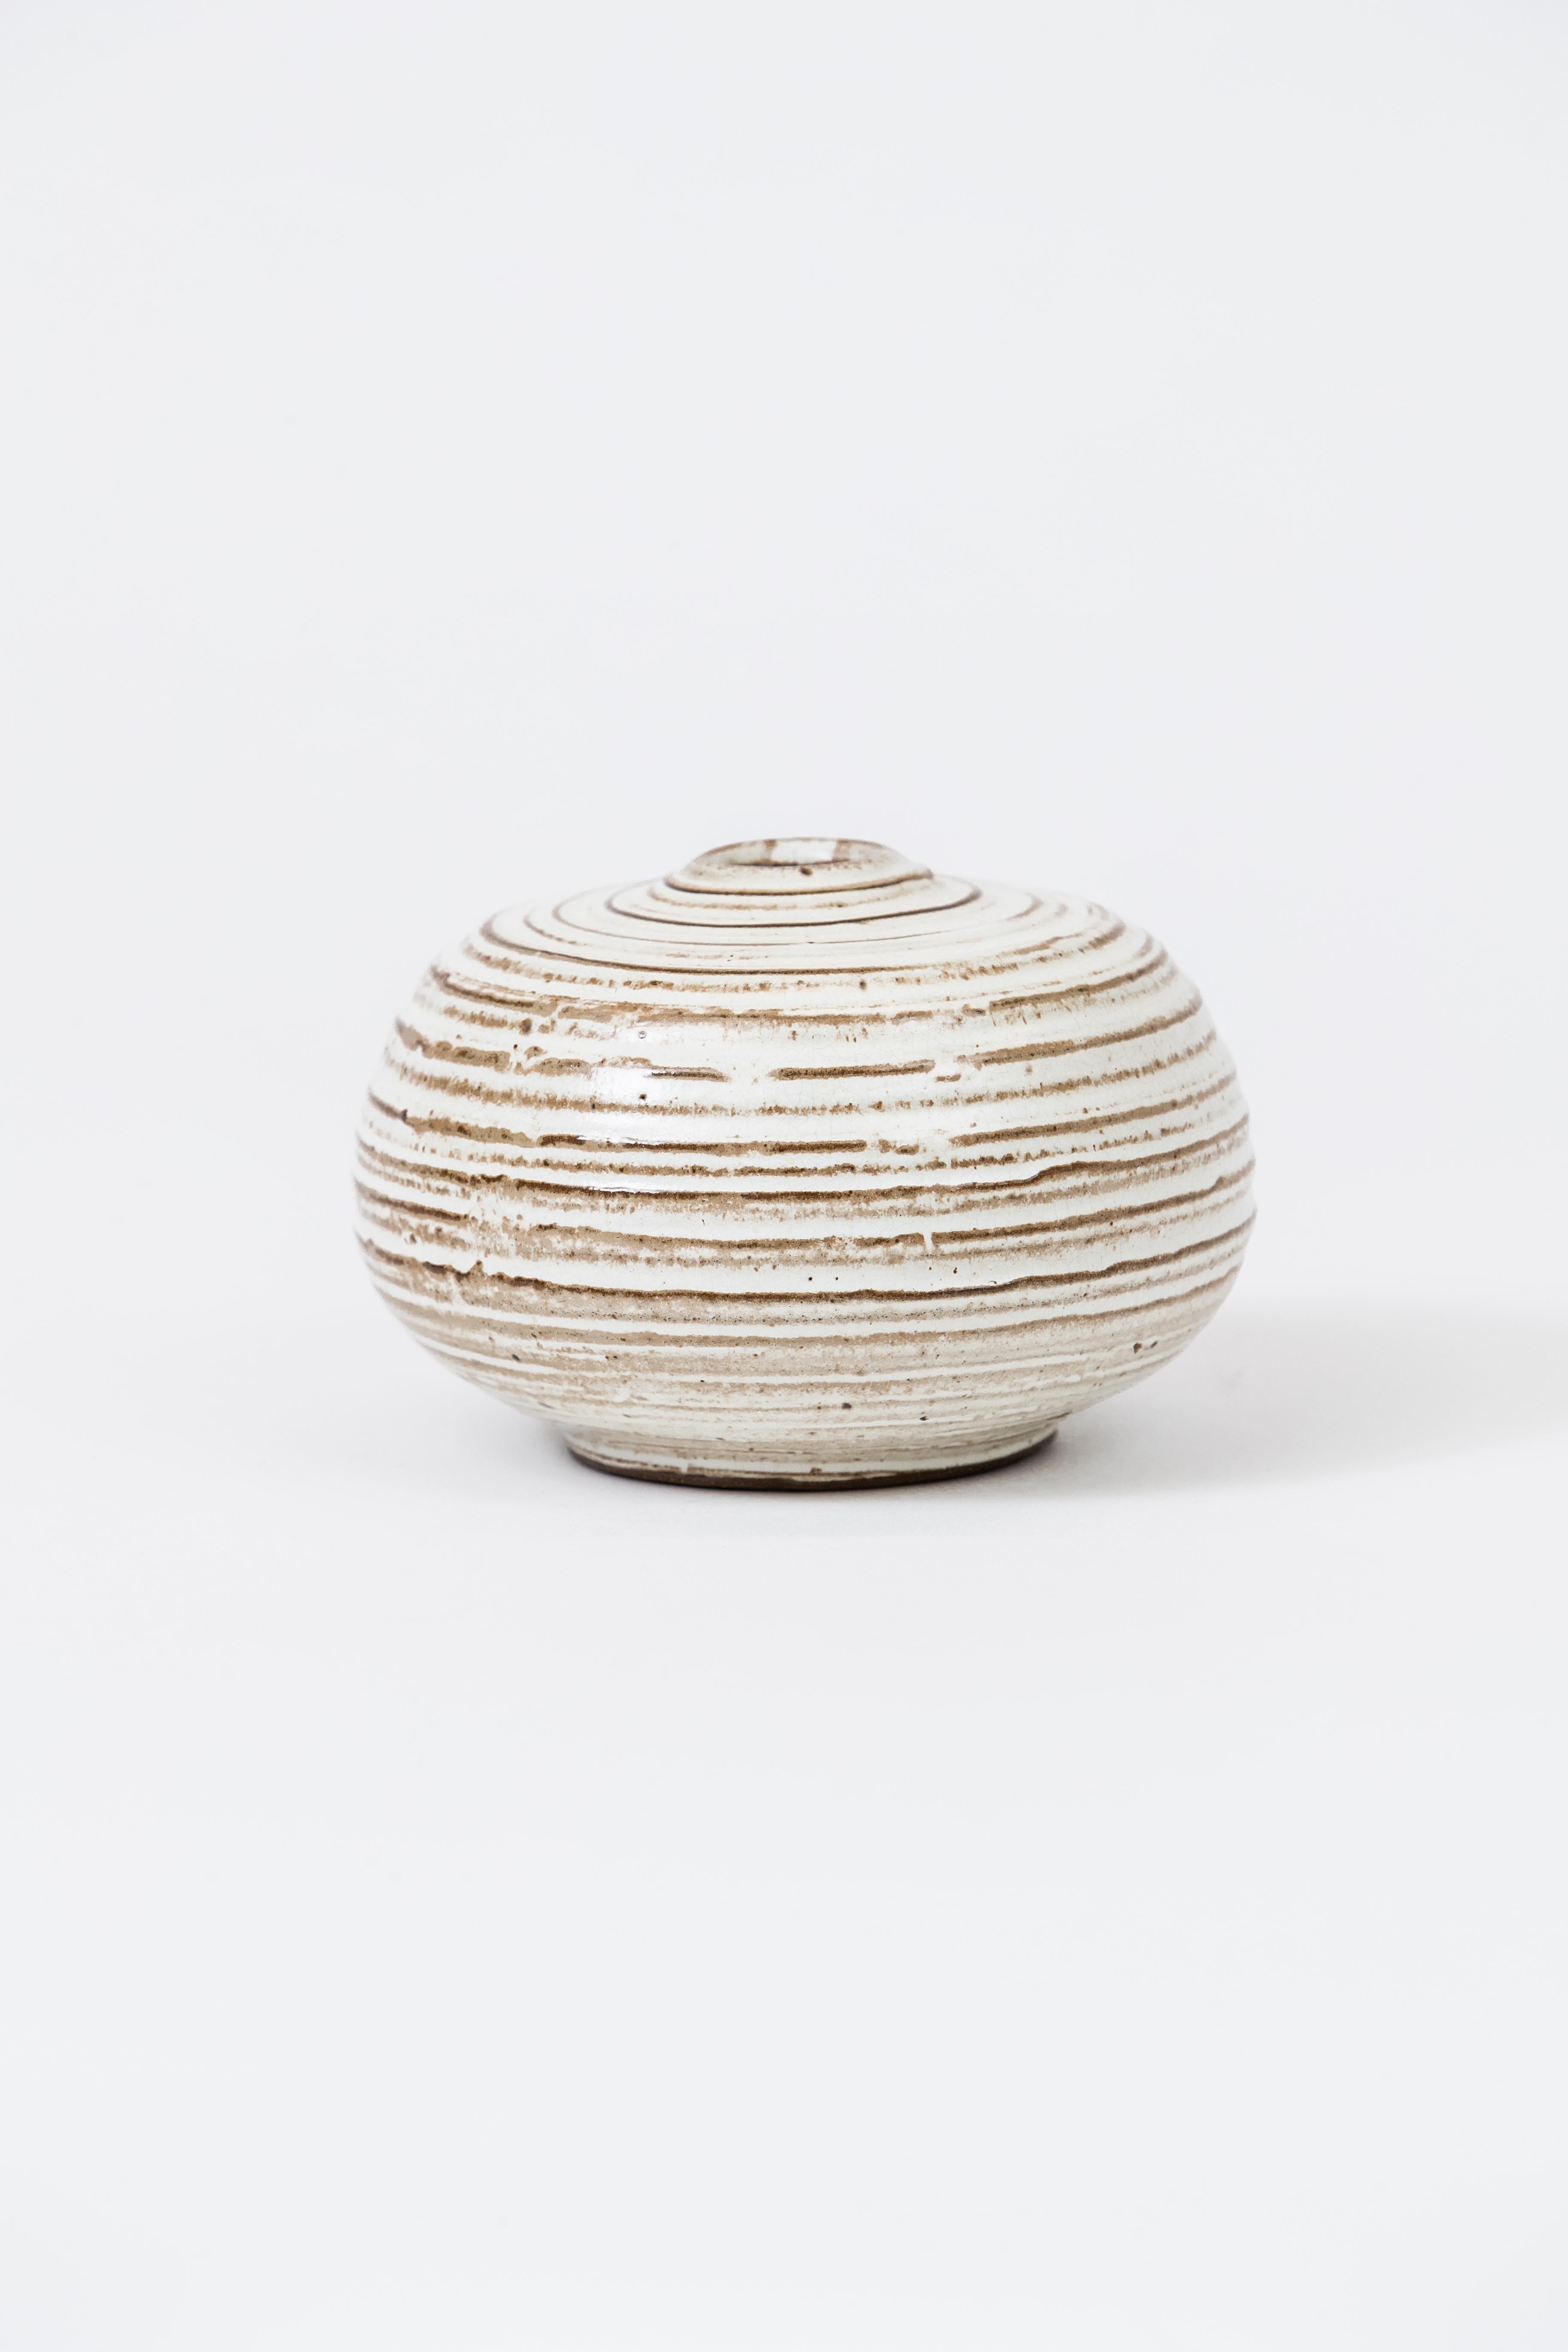 A striated ceramic bud vase in glazes of whites with earth tones reliefs.